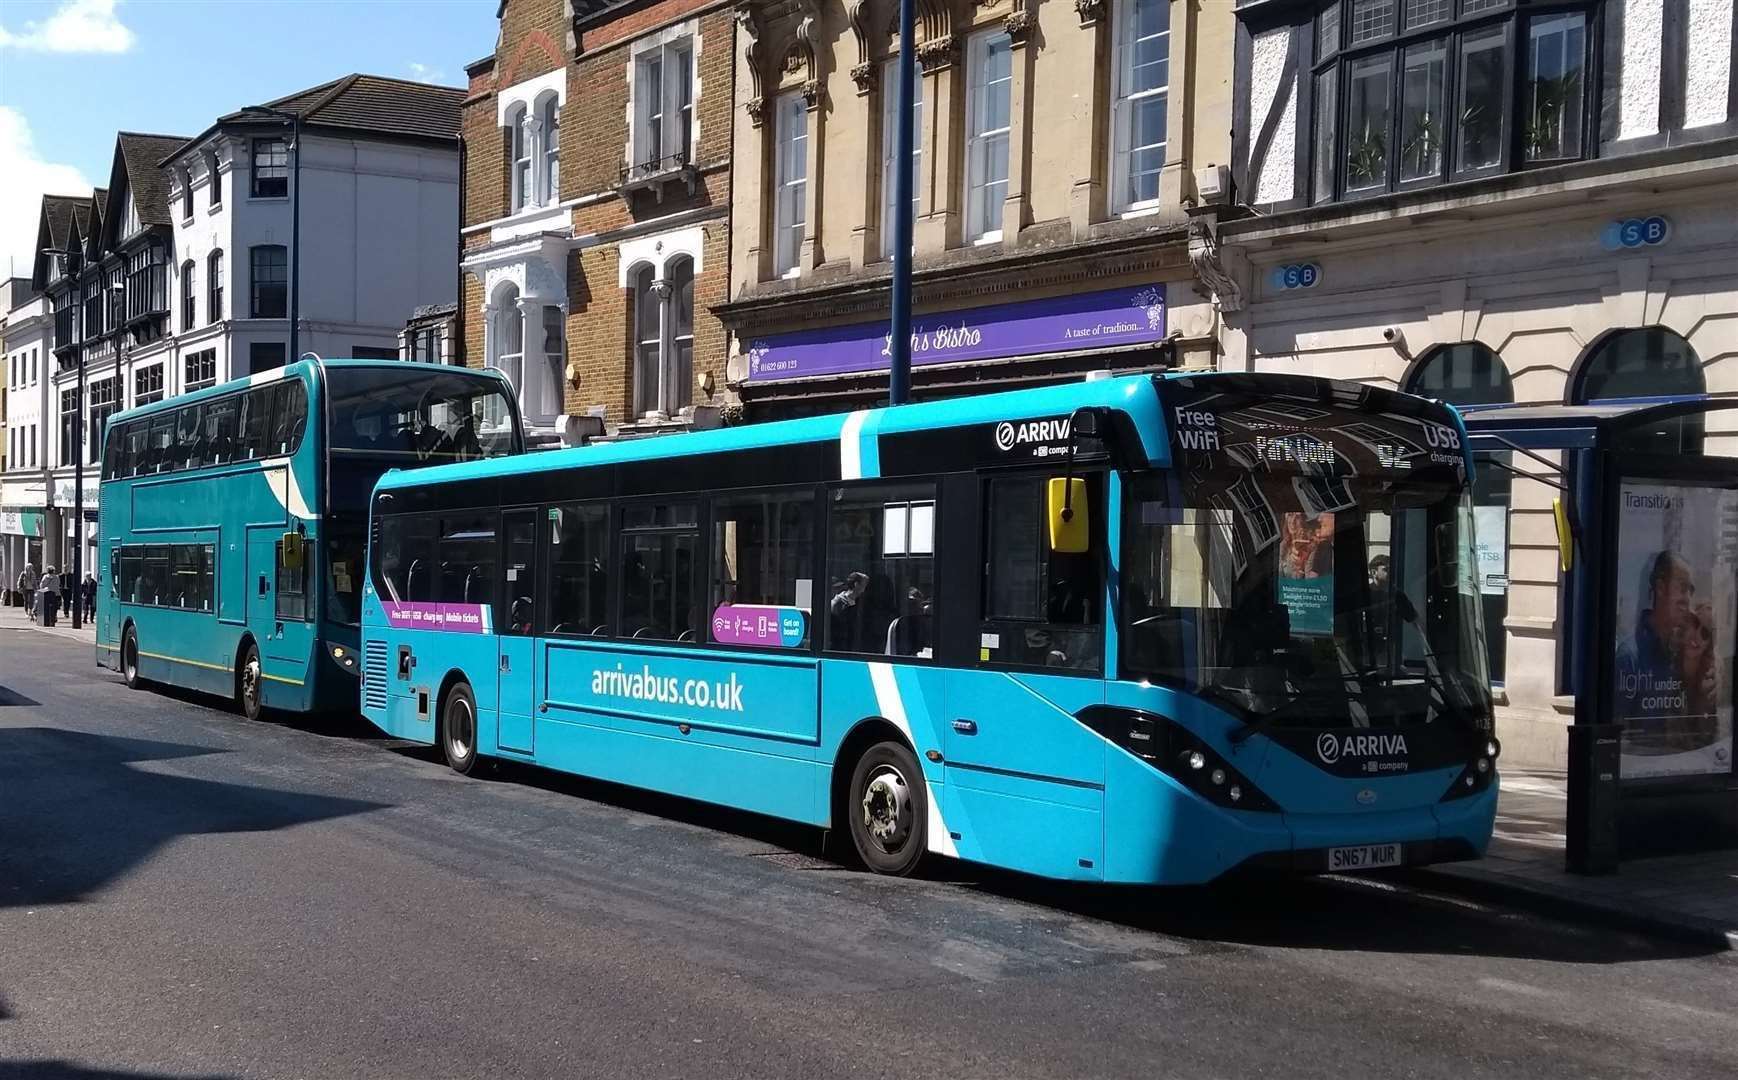 Maidstone buses are under threat due to the route cuts